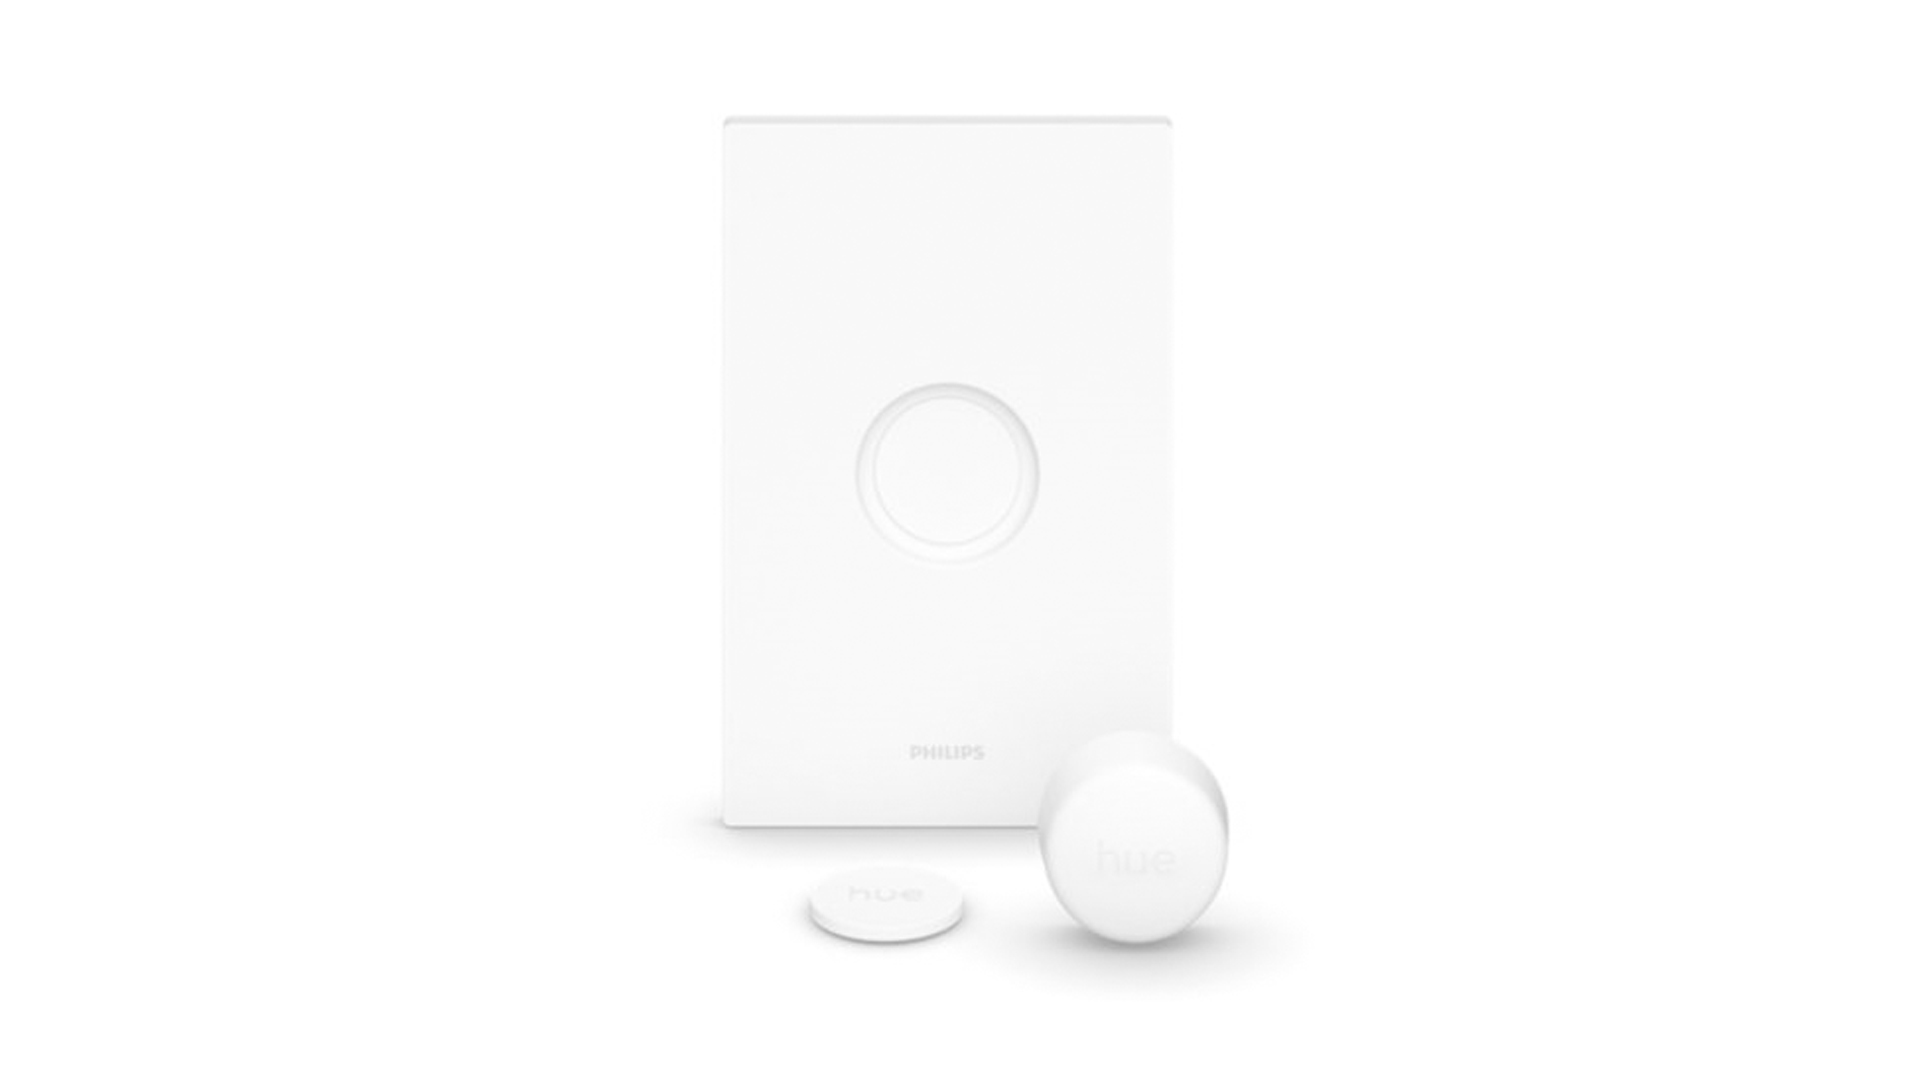 The Philips Hue Smart Button and its mounts